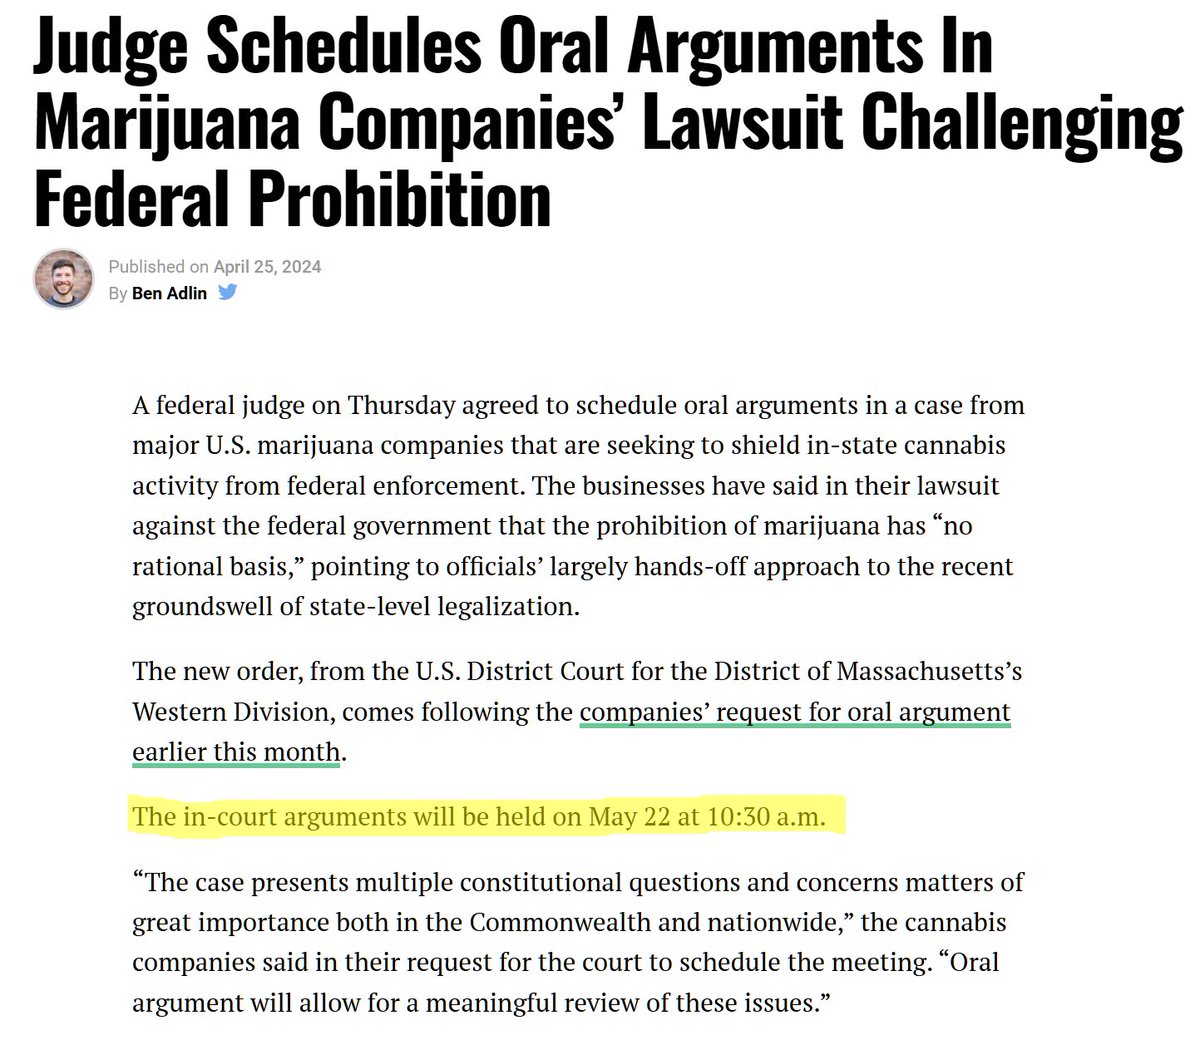 Reminder: in-court arguments for the lawsuit challenging federal prohibition will be held next week on May 22 at 10:30 am David Boies has racked up victory after victory, defending IBM, CBS, Apple v. Samsung, and more. Hollingsworth v. Perry (2013): Boies played a pivotal role…